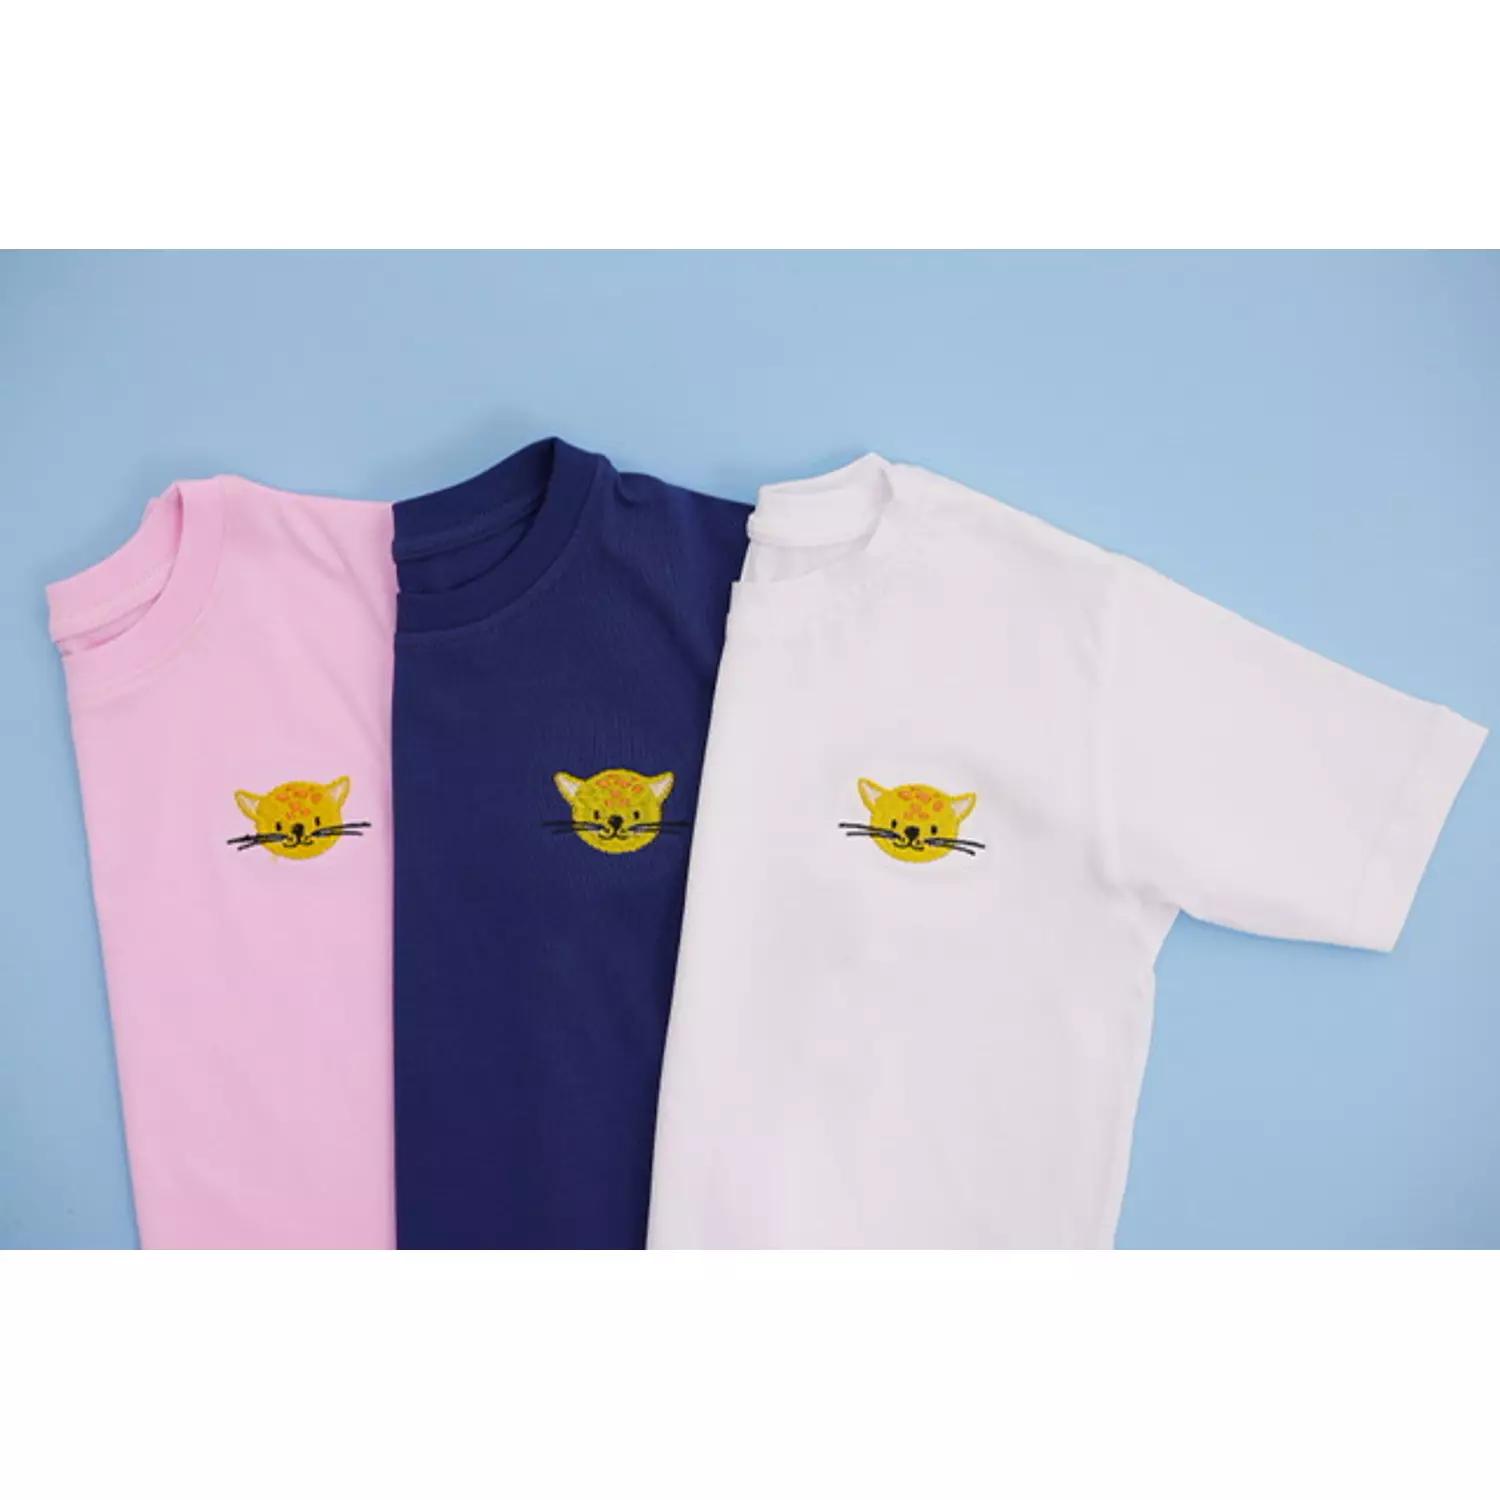 Cotton T-shirts  hover image